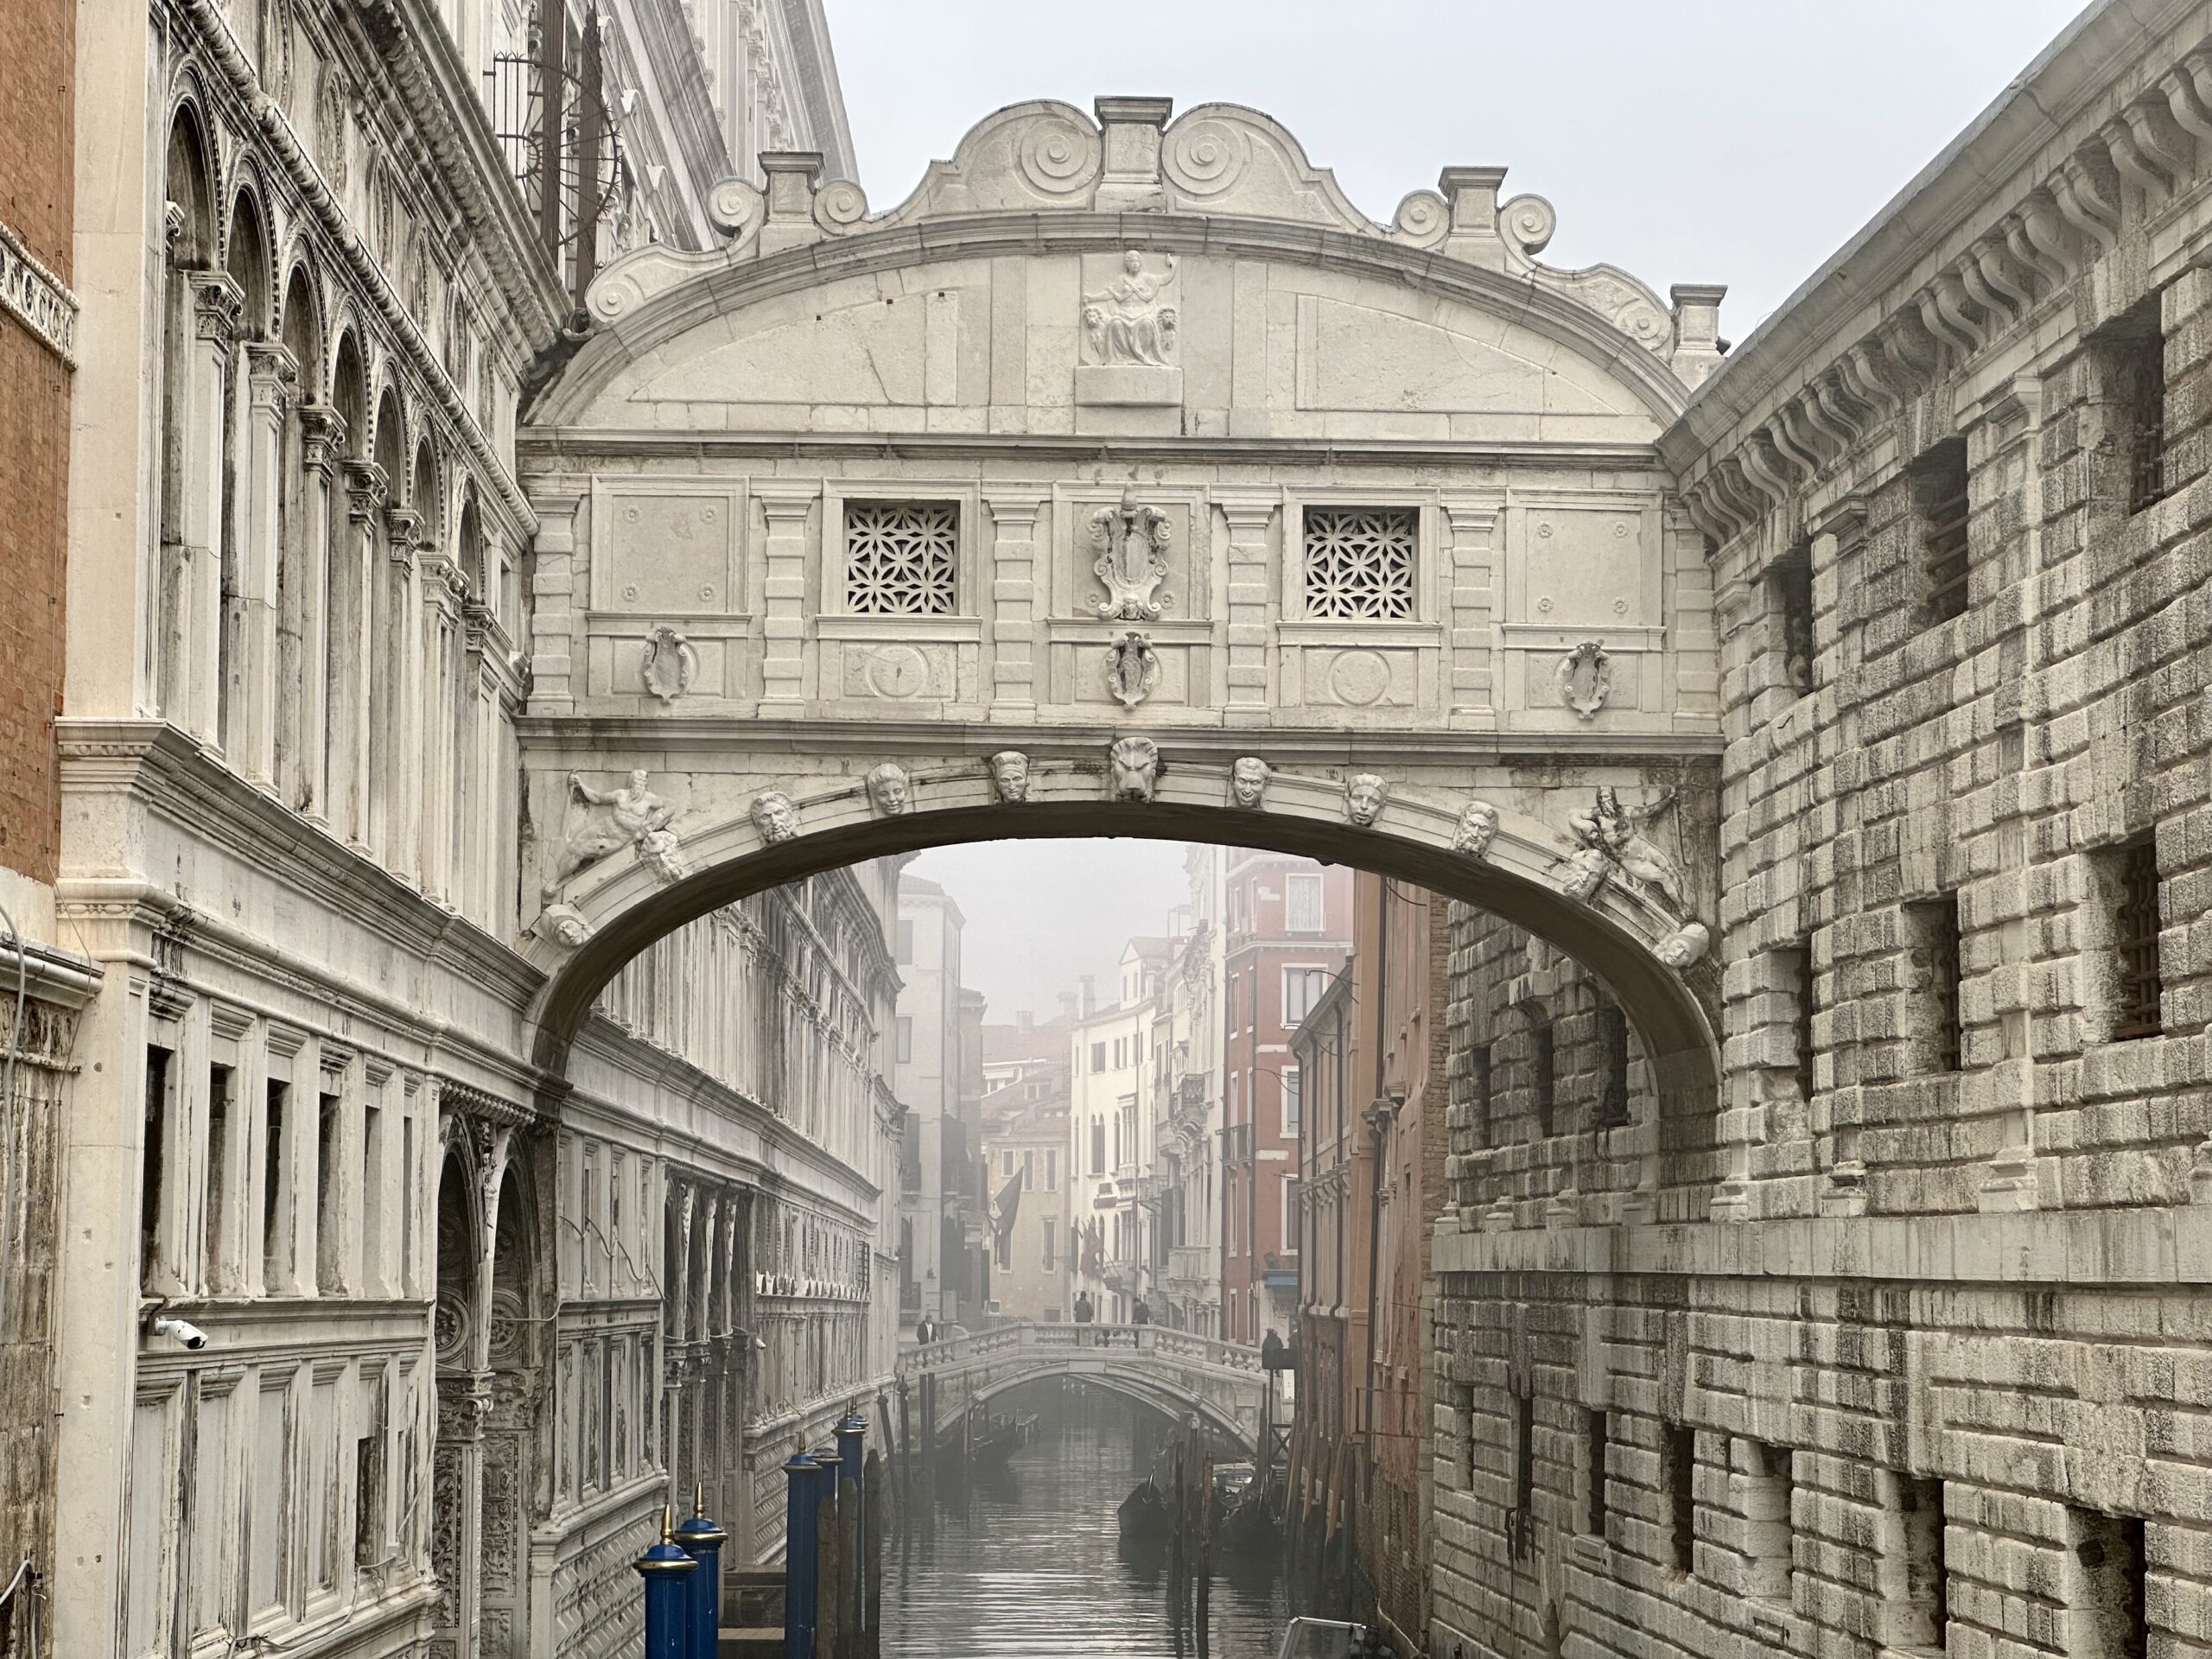 View of the Bridge of Sighs in Venice